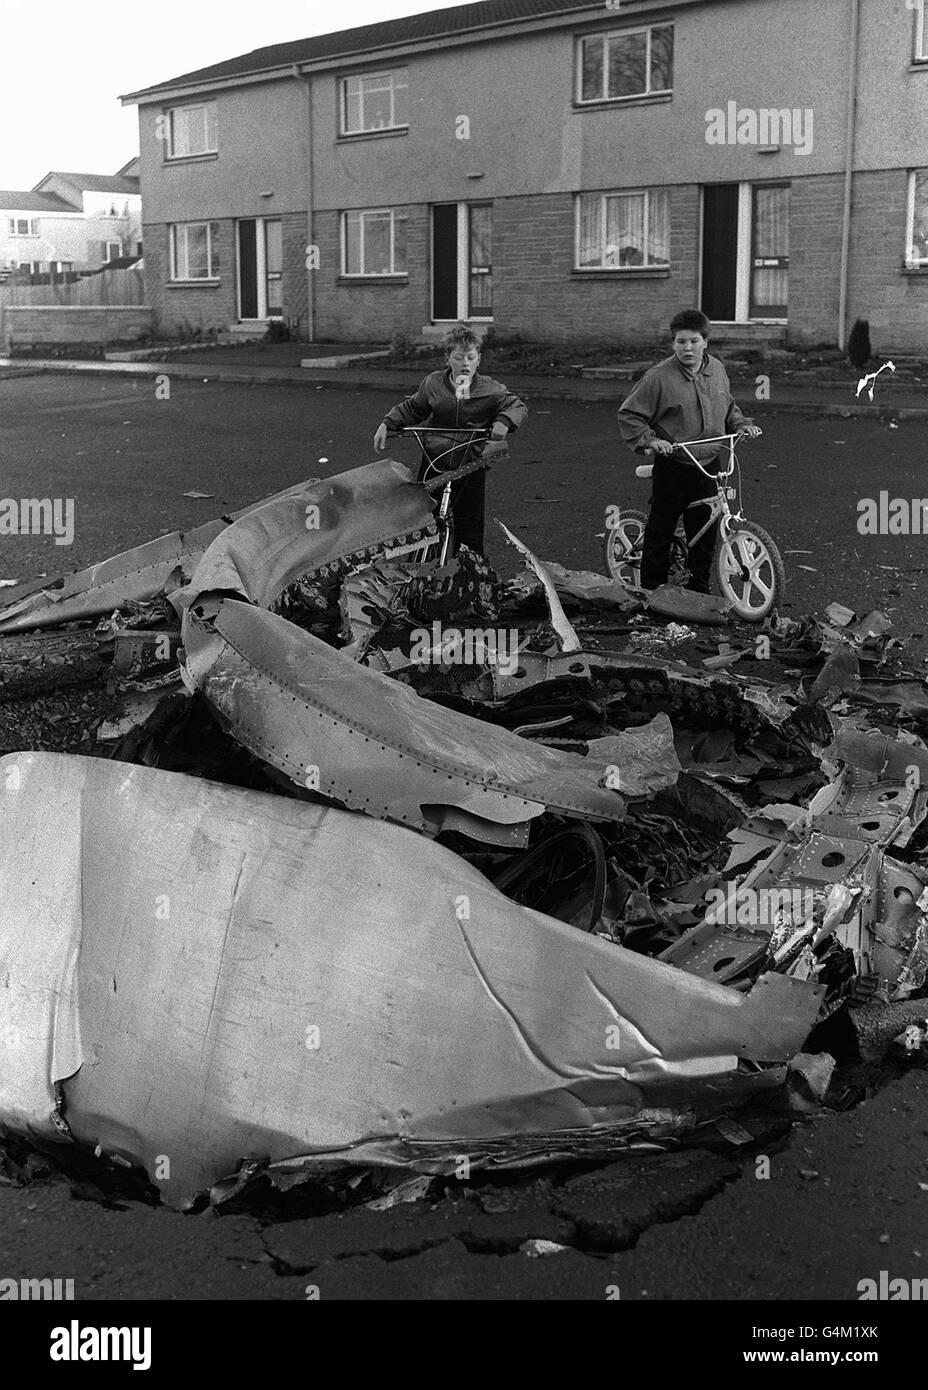 Young children survey wreckage of the PAN AM Boeing 747 jumbo jet which crashed on the Scottish town of Lockerbie, near Dumfries, the night of 21/12/88, killing all 270 people on board. * 30/01/2001: Three judges will be returning to court 31/01/2001 in Camp Zeist in Holland to announce the fate of the two Libyans accused of planting the bomb that destroyed a Pan-Am Boing 747 over Lockerbie in December 1998, killing 270 people. 14/08/2003: A deal was welcomed by Lockerbie's MP, Thursday August 14, 2003, who said the town could now move on following an admission by Libya of responsibility for Stock Photo